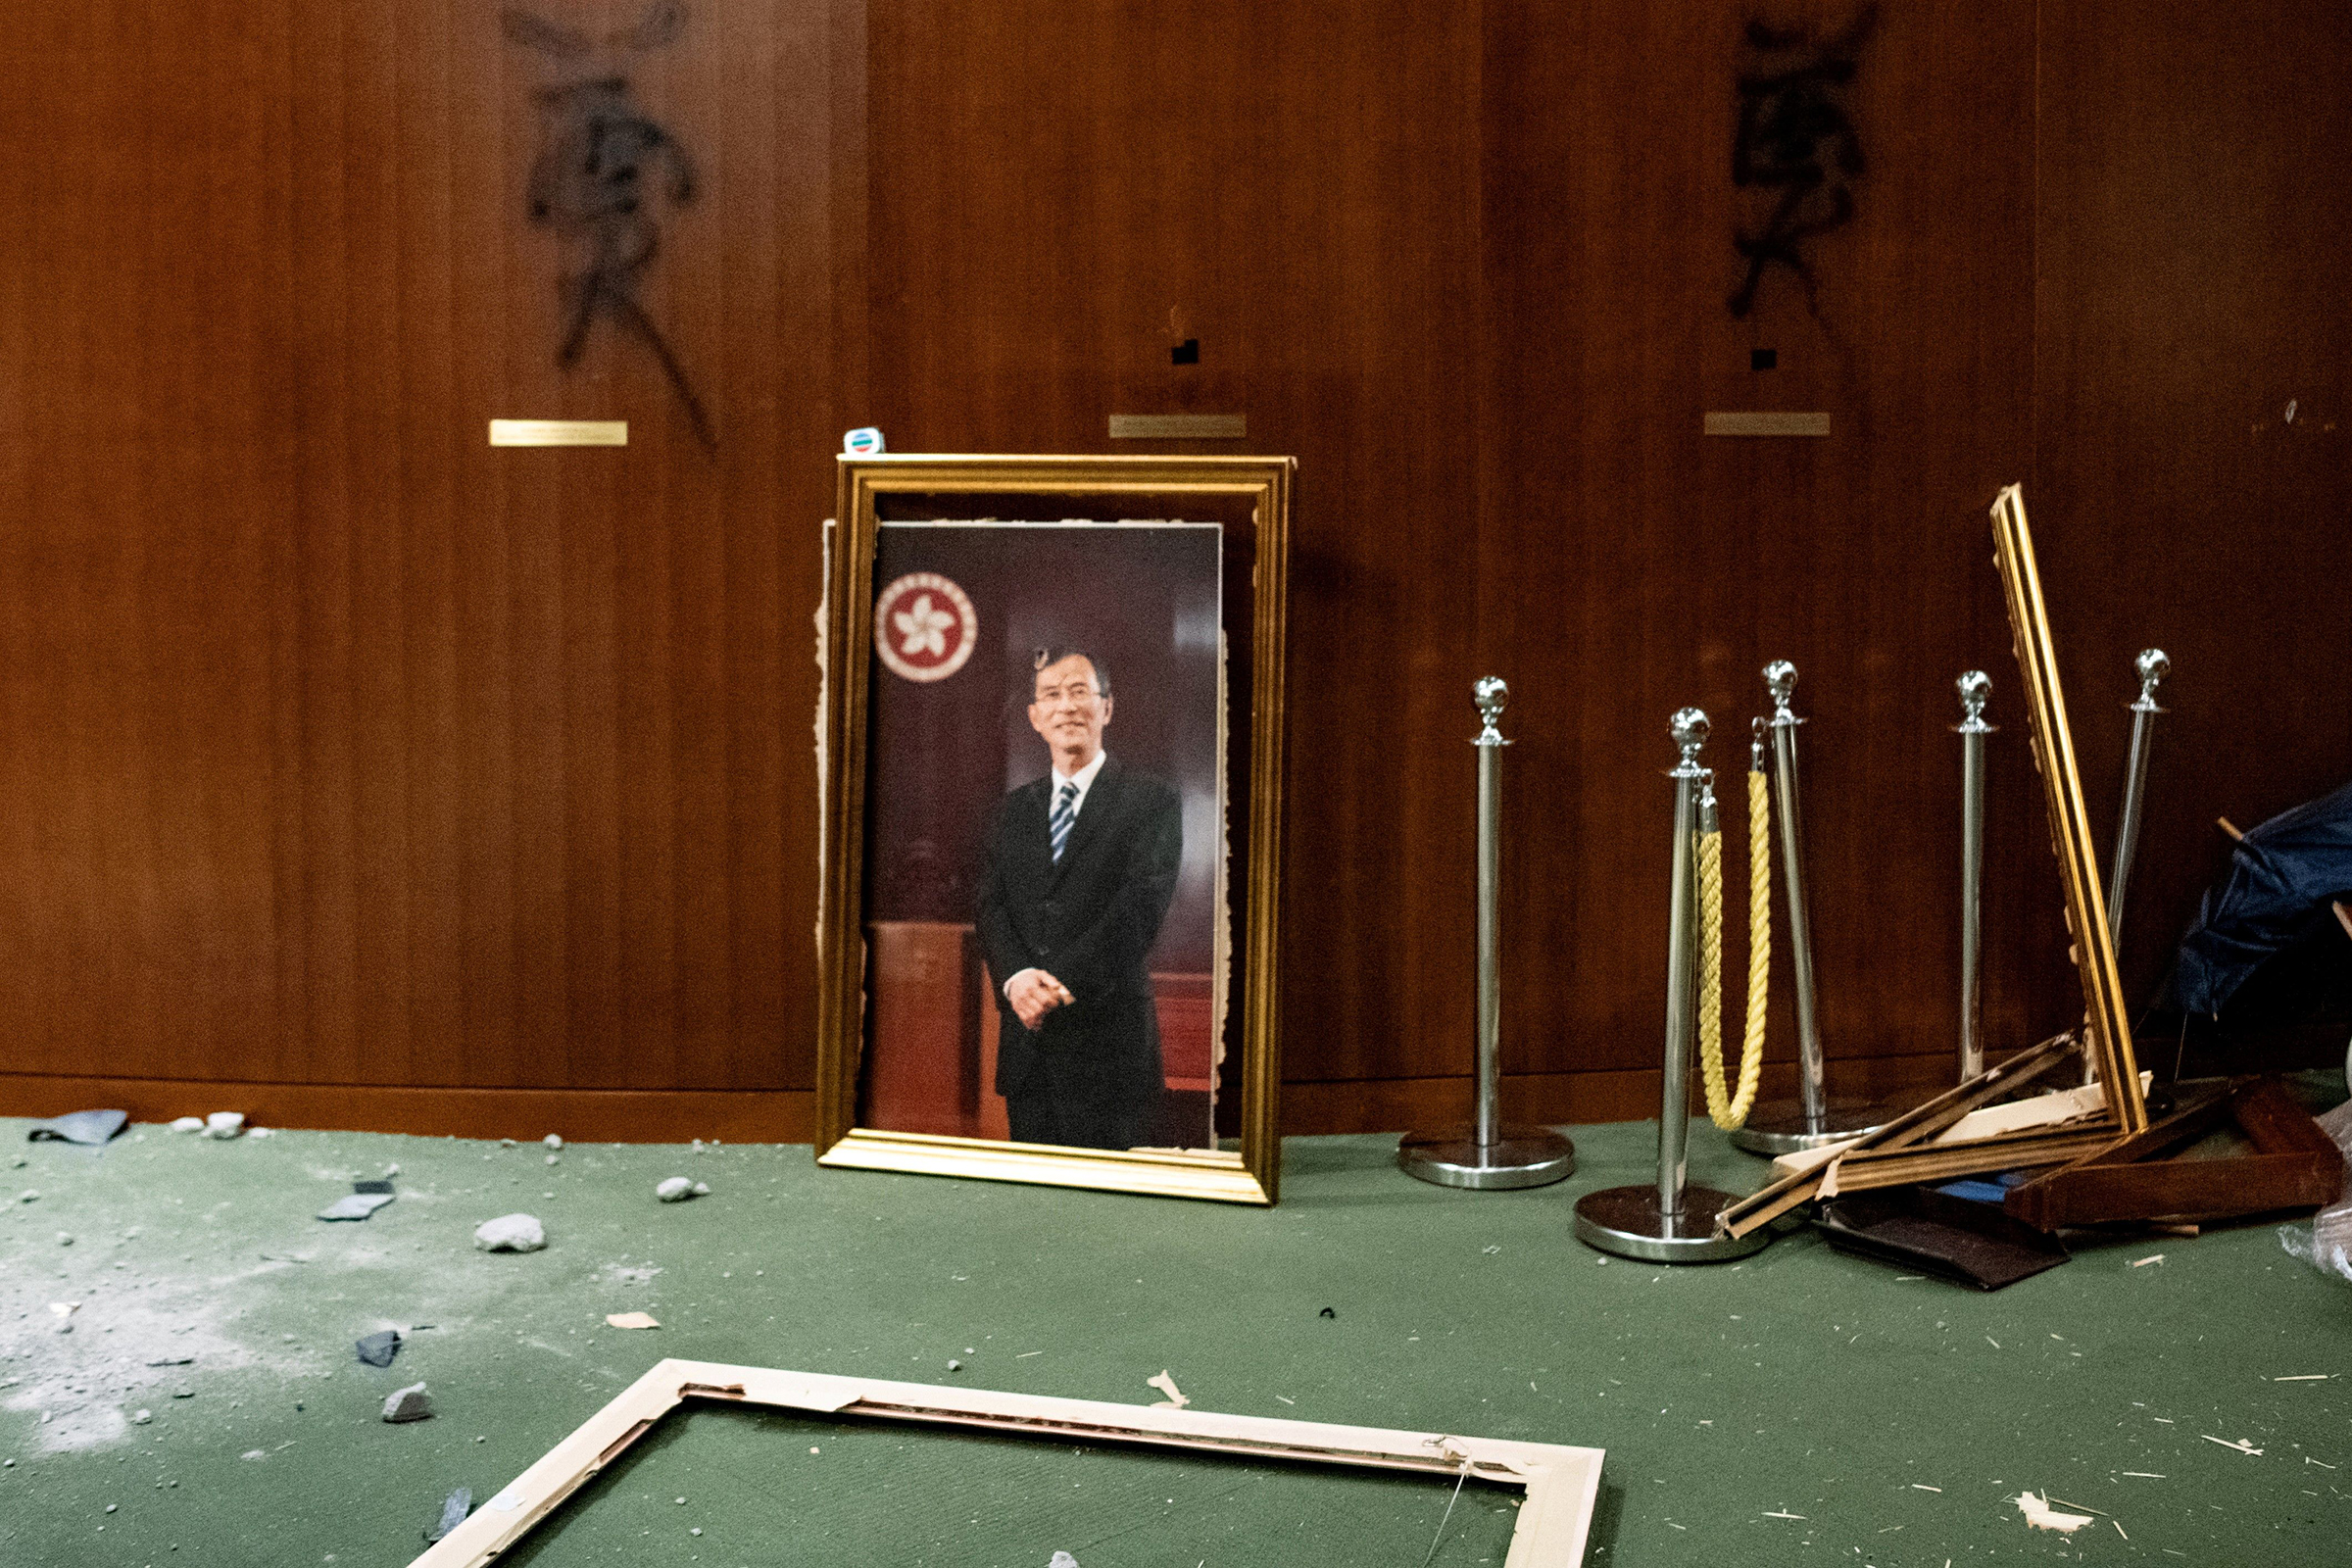 The portrait of a former chairman of the Legislative Council, Jasper Tsang, is destroyed after protesters broke into the chamber of the Legislative Council in Hong Kong on July 1, 2019. (Philip Fong—AFP/Getty Images)